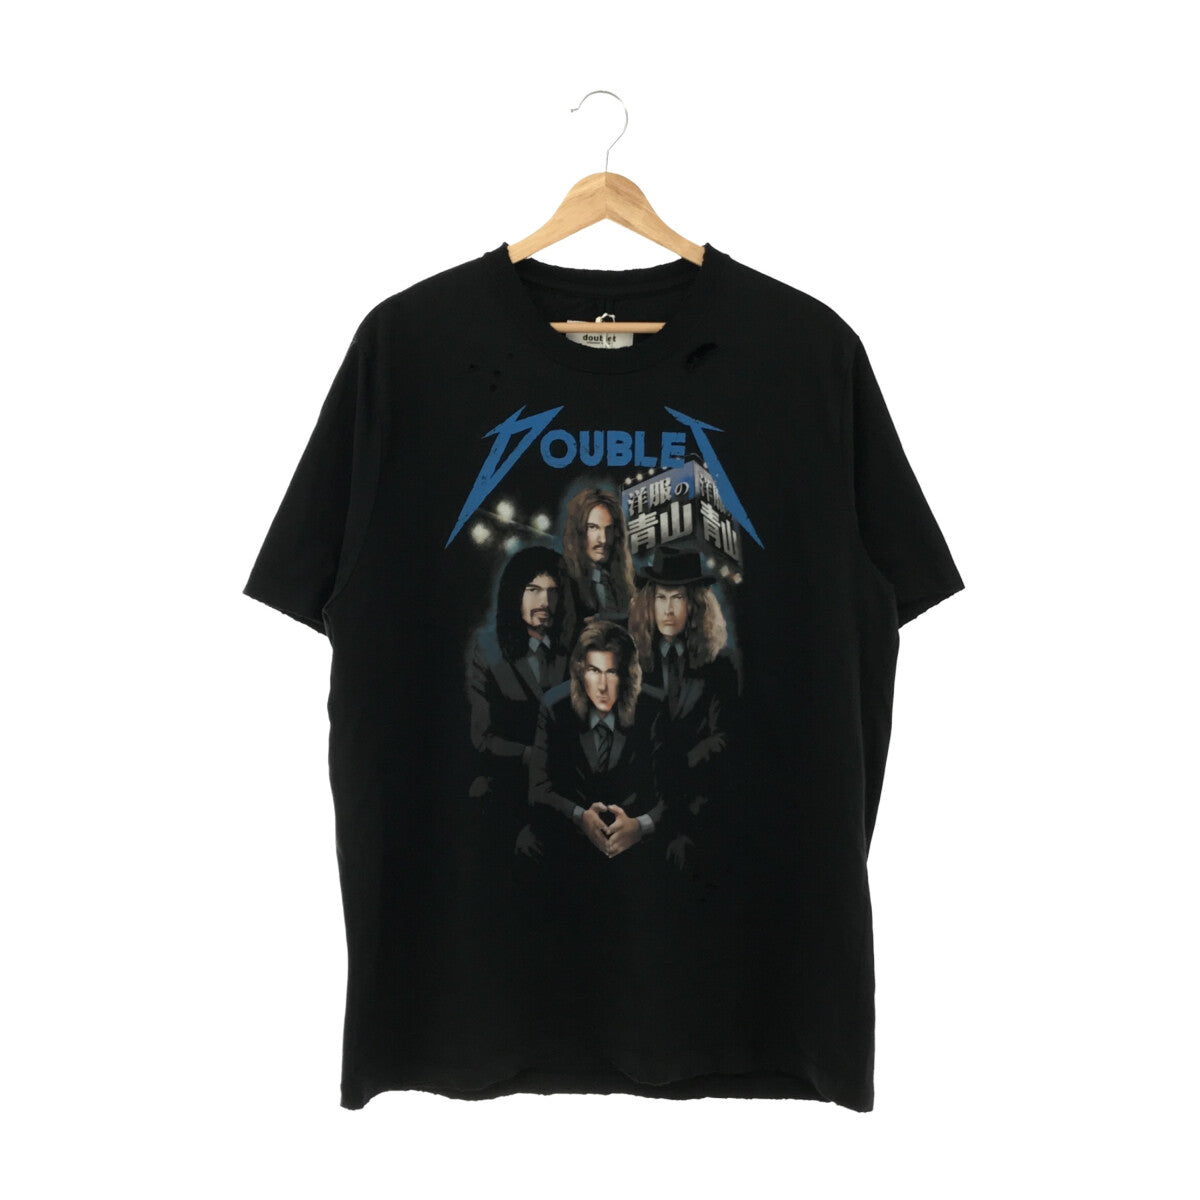 doublet / ダブレット | 2022SS | AOYAMA ROCK T-SHIRT / ヴィンテージ加工 青山 ロック プリントTシャツ |  M |